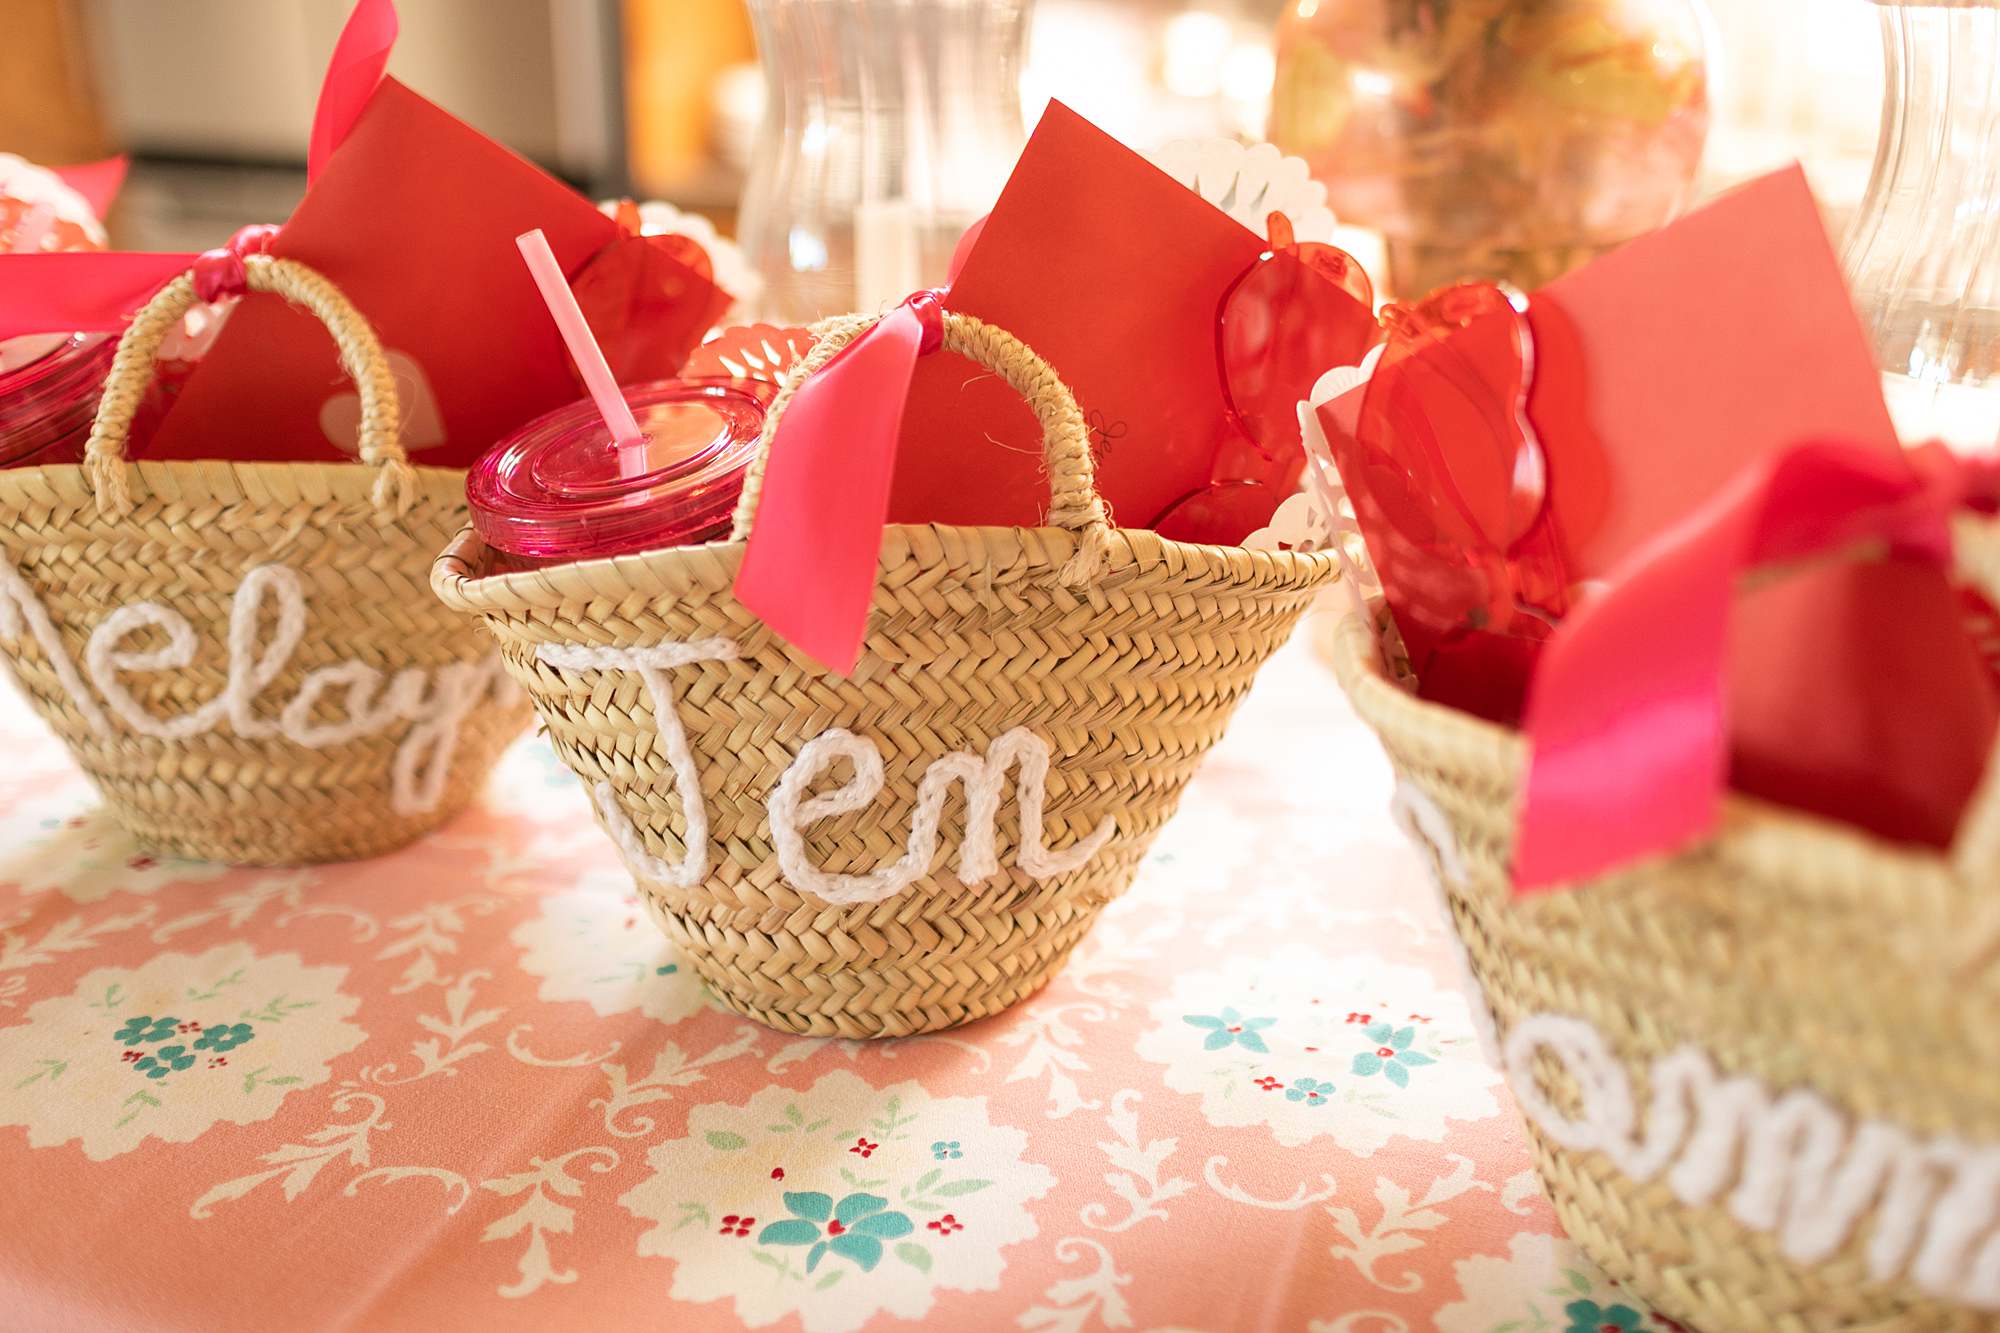 personalized baskets valentines day galentine's day party and gift ideas 